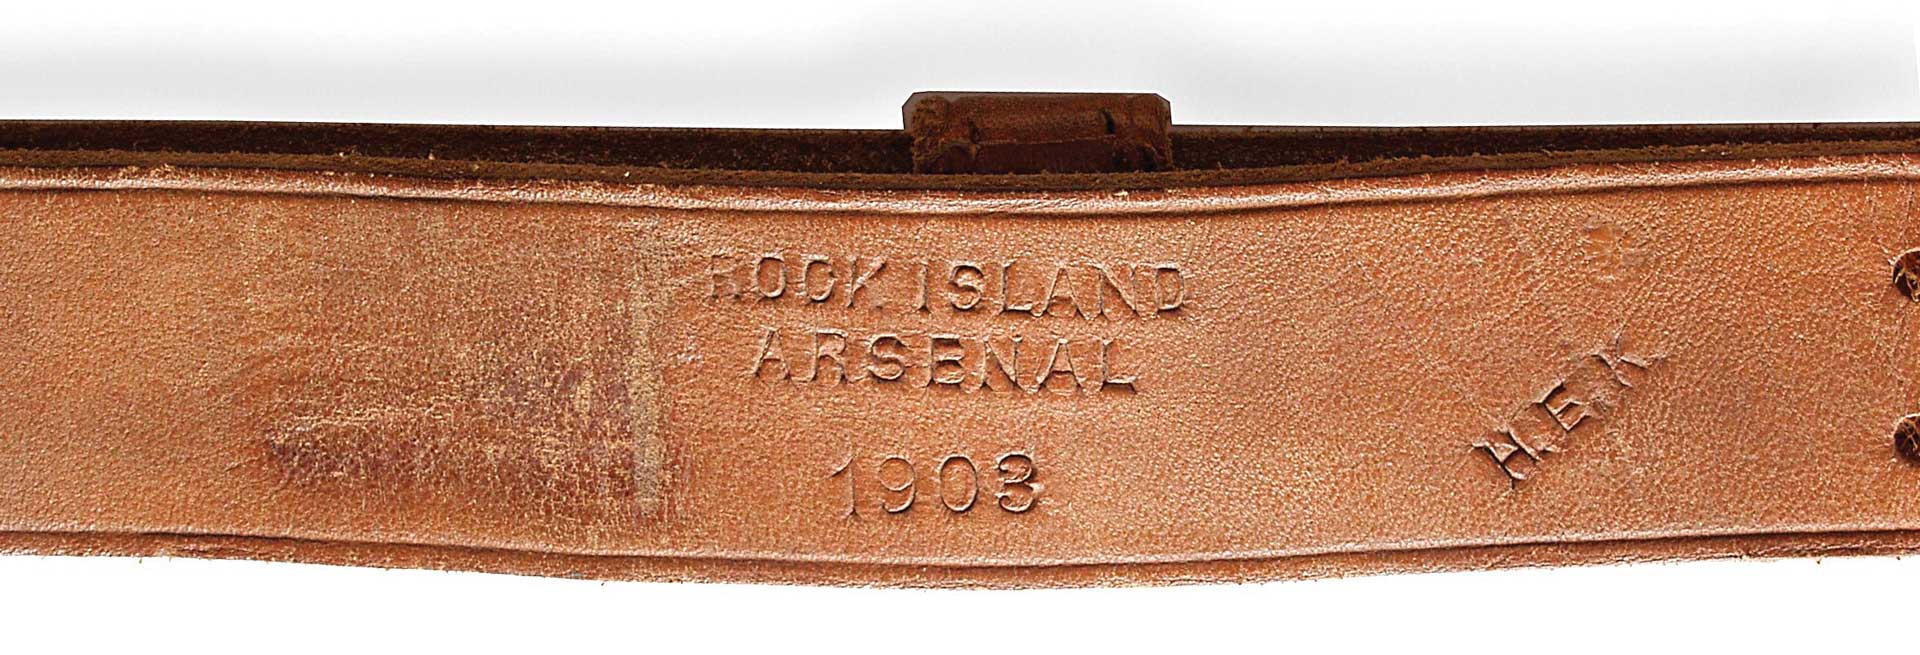 brown leather sling stamped with Rock Island Arsenal